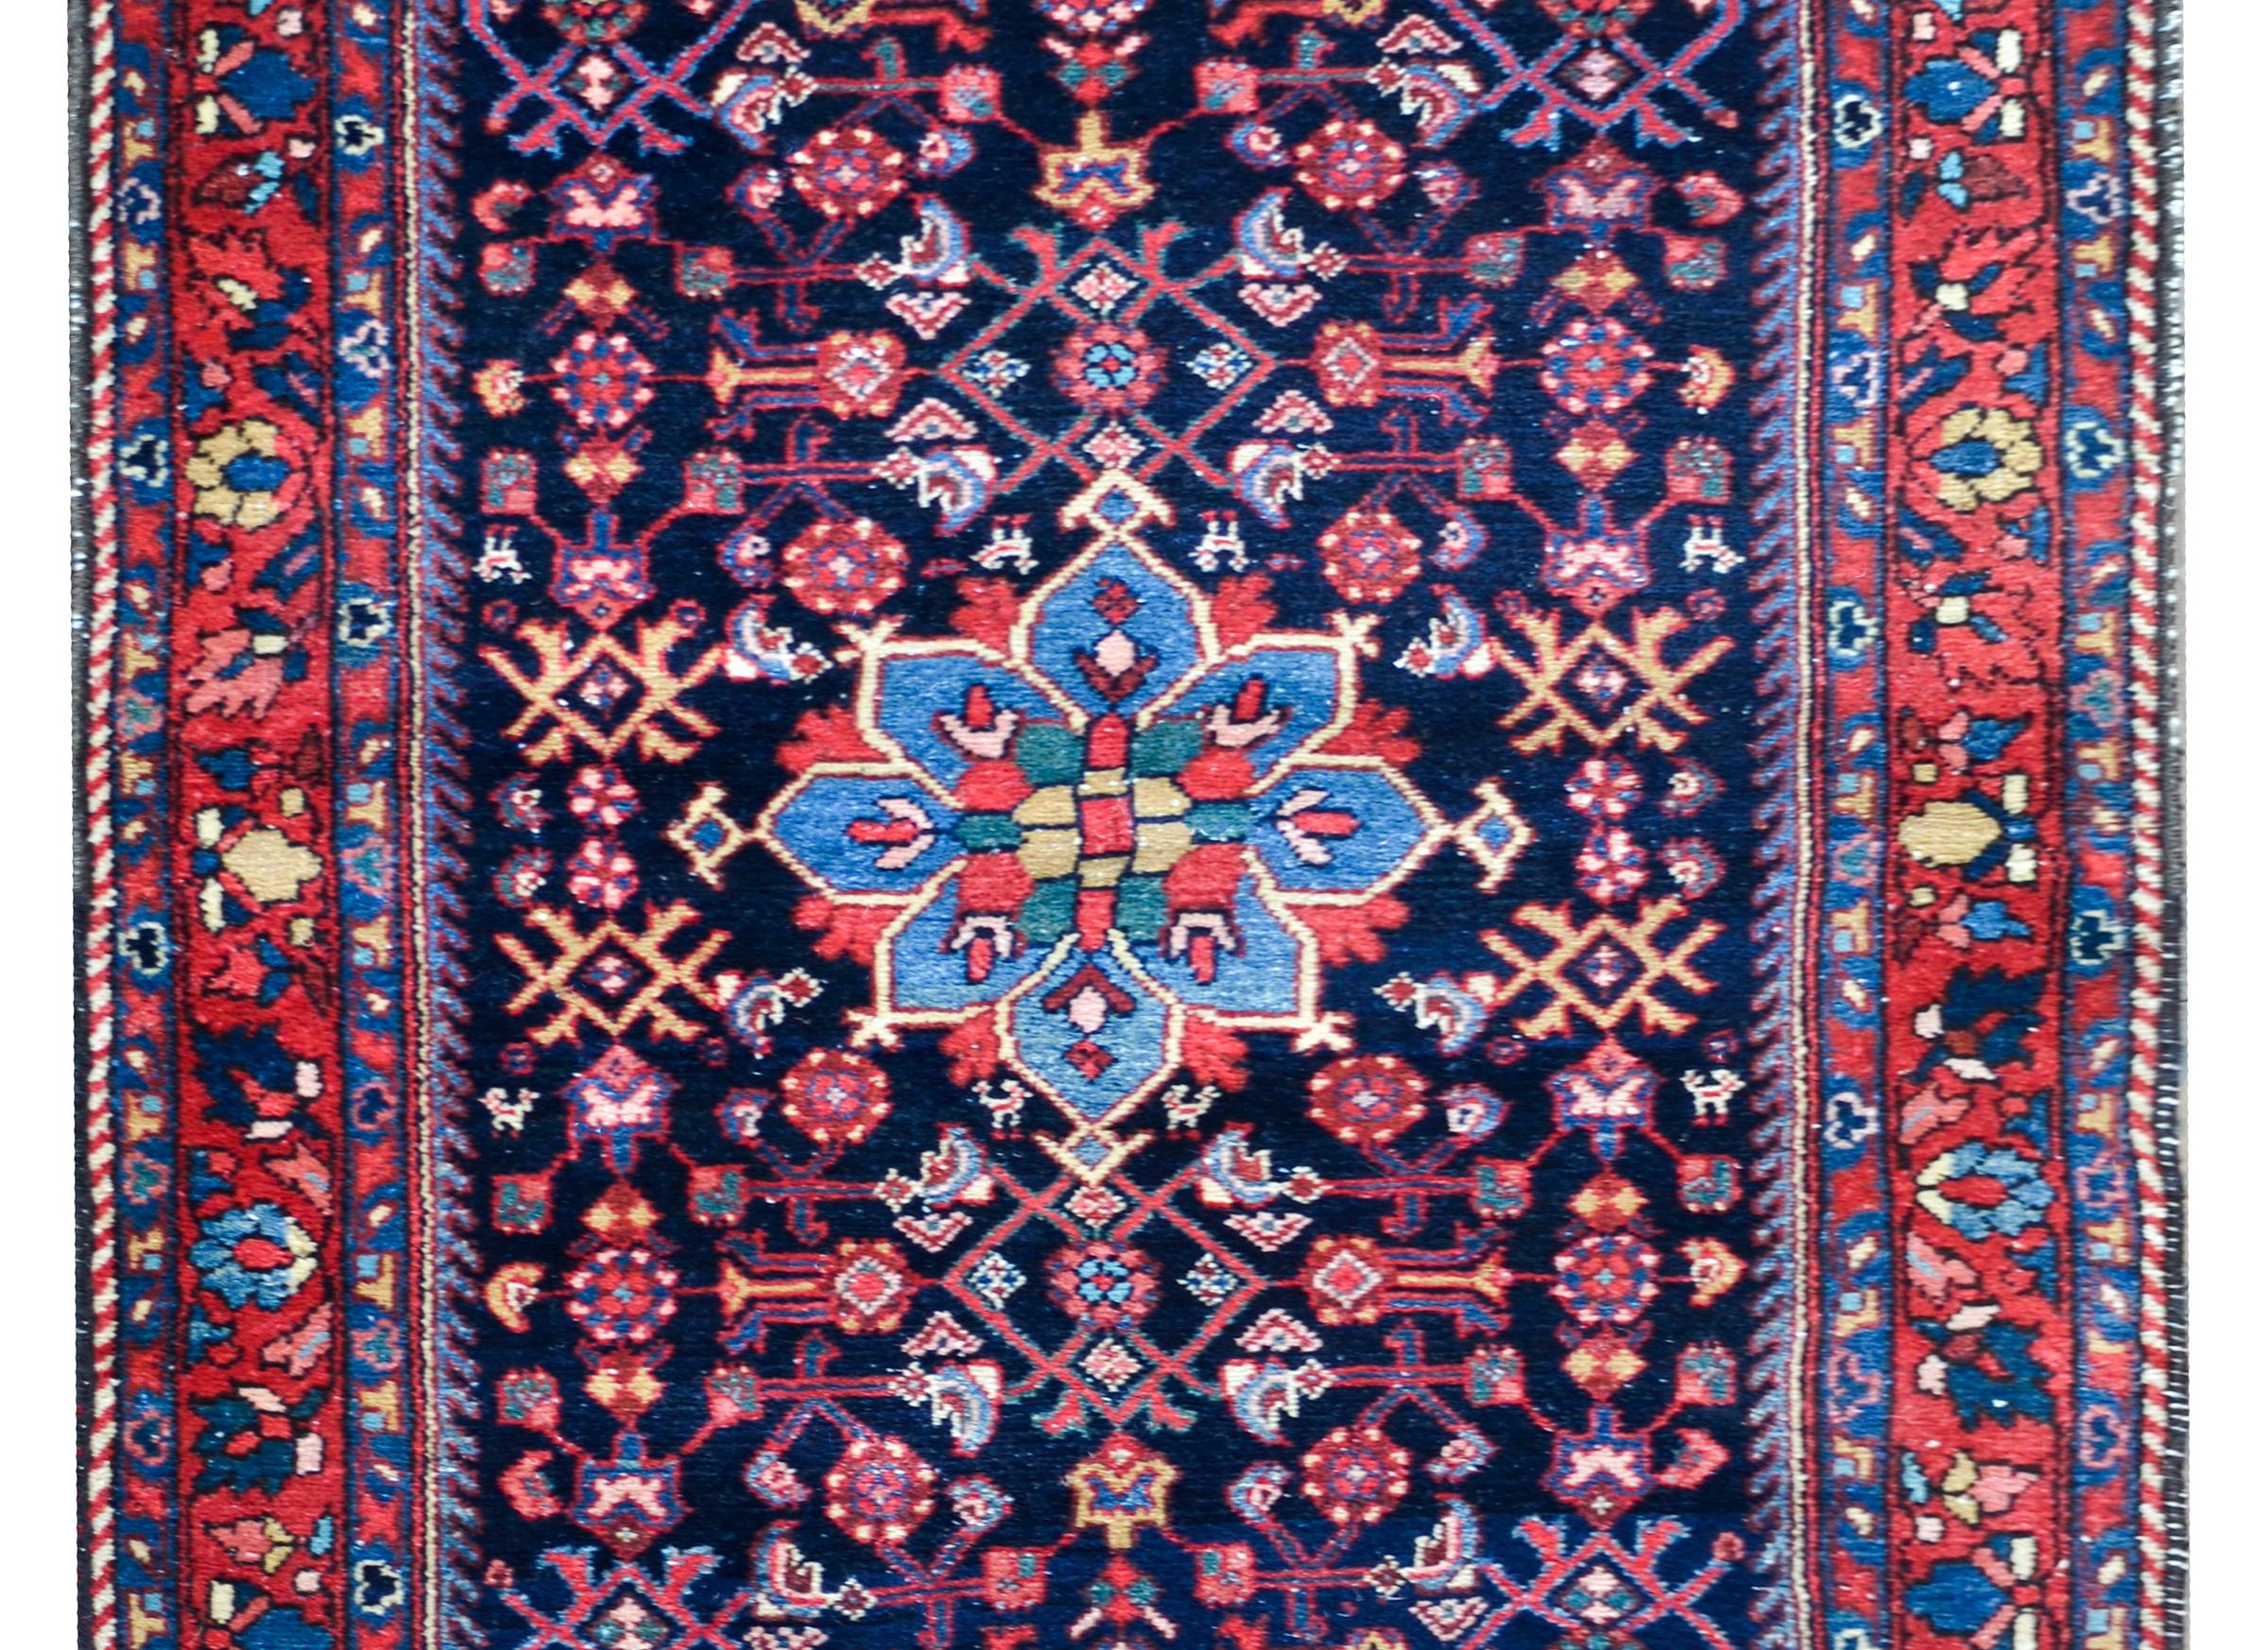 A striking early 20th century Persian Bibikibad rug with an all-over stylized floral and scrolling vine pattern woven in crimson, light and dark indigo, gold, and white against a dark indigo background. The border is wonderful with multiple large